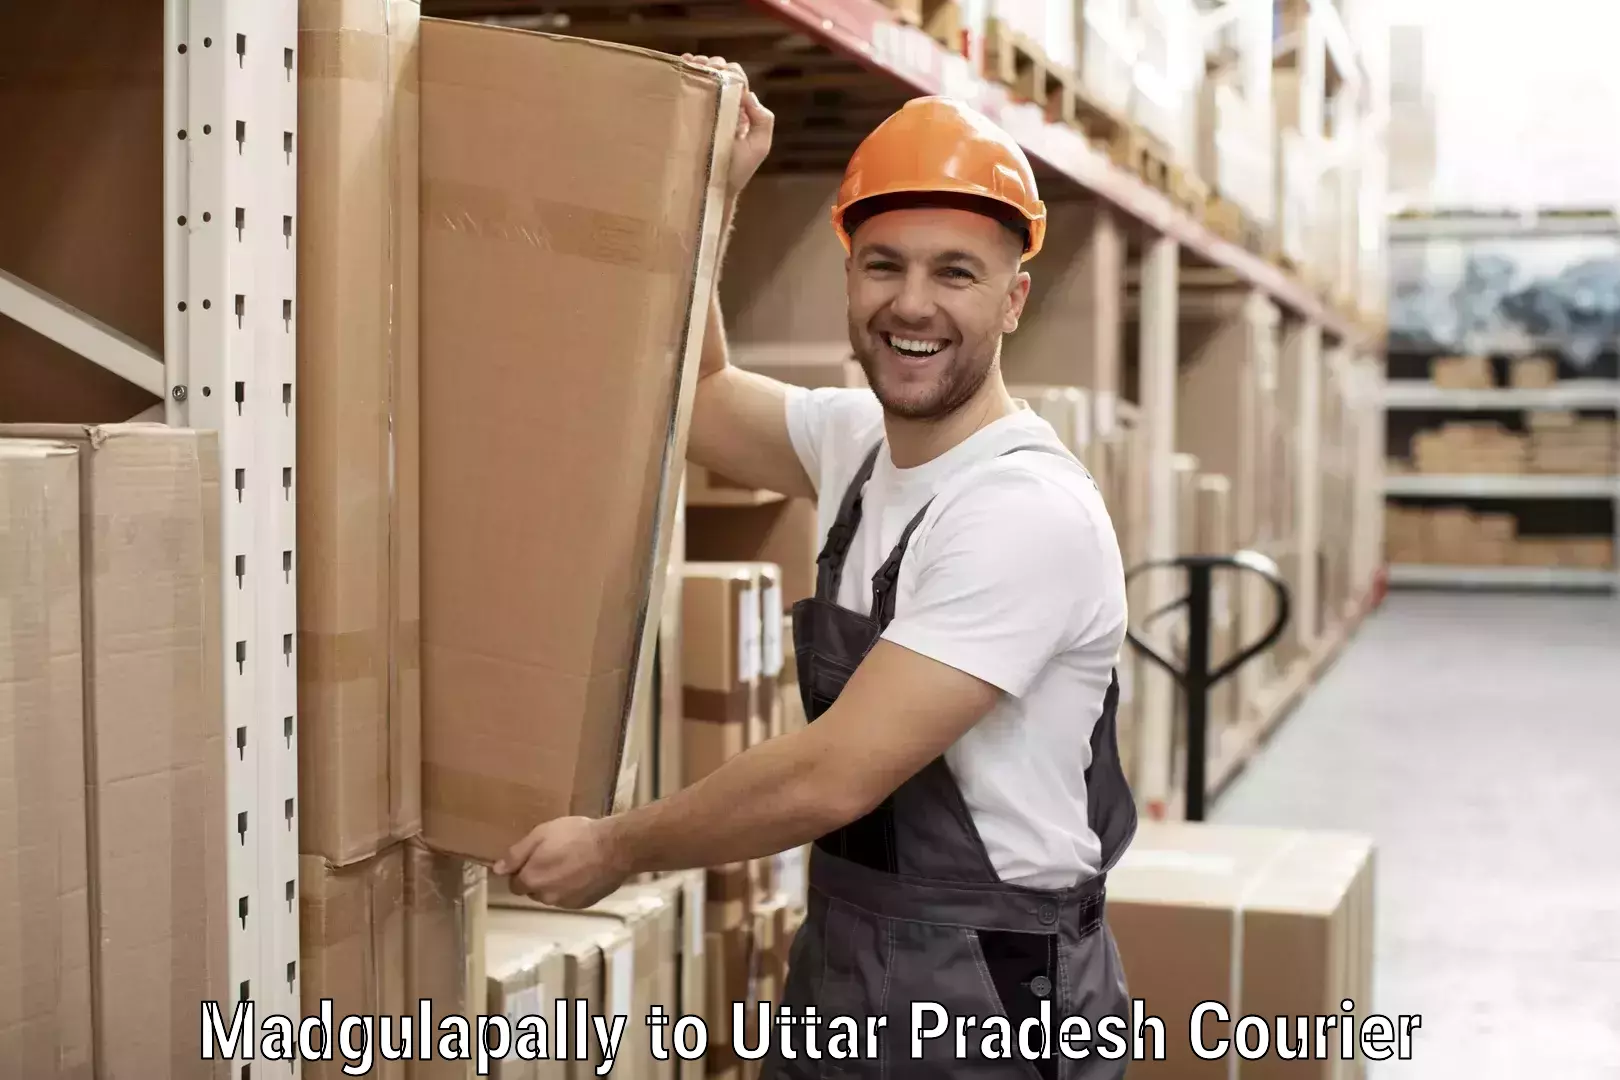 Easy access courier services Madgulapally to Naugarh